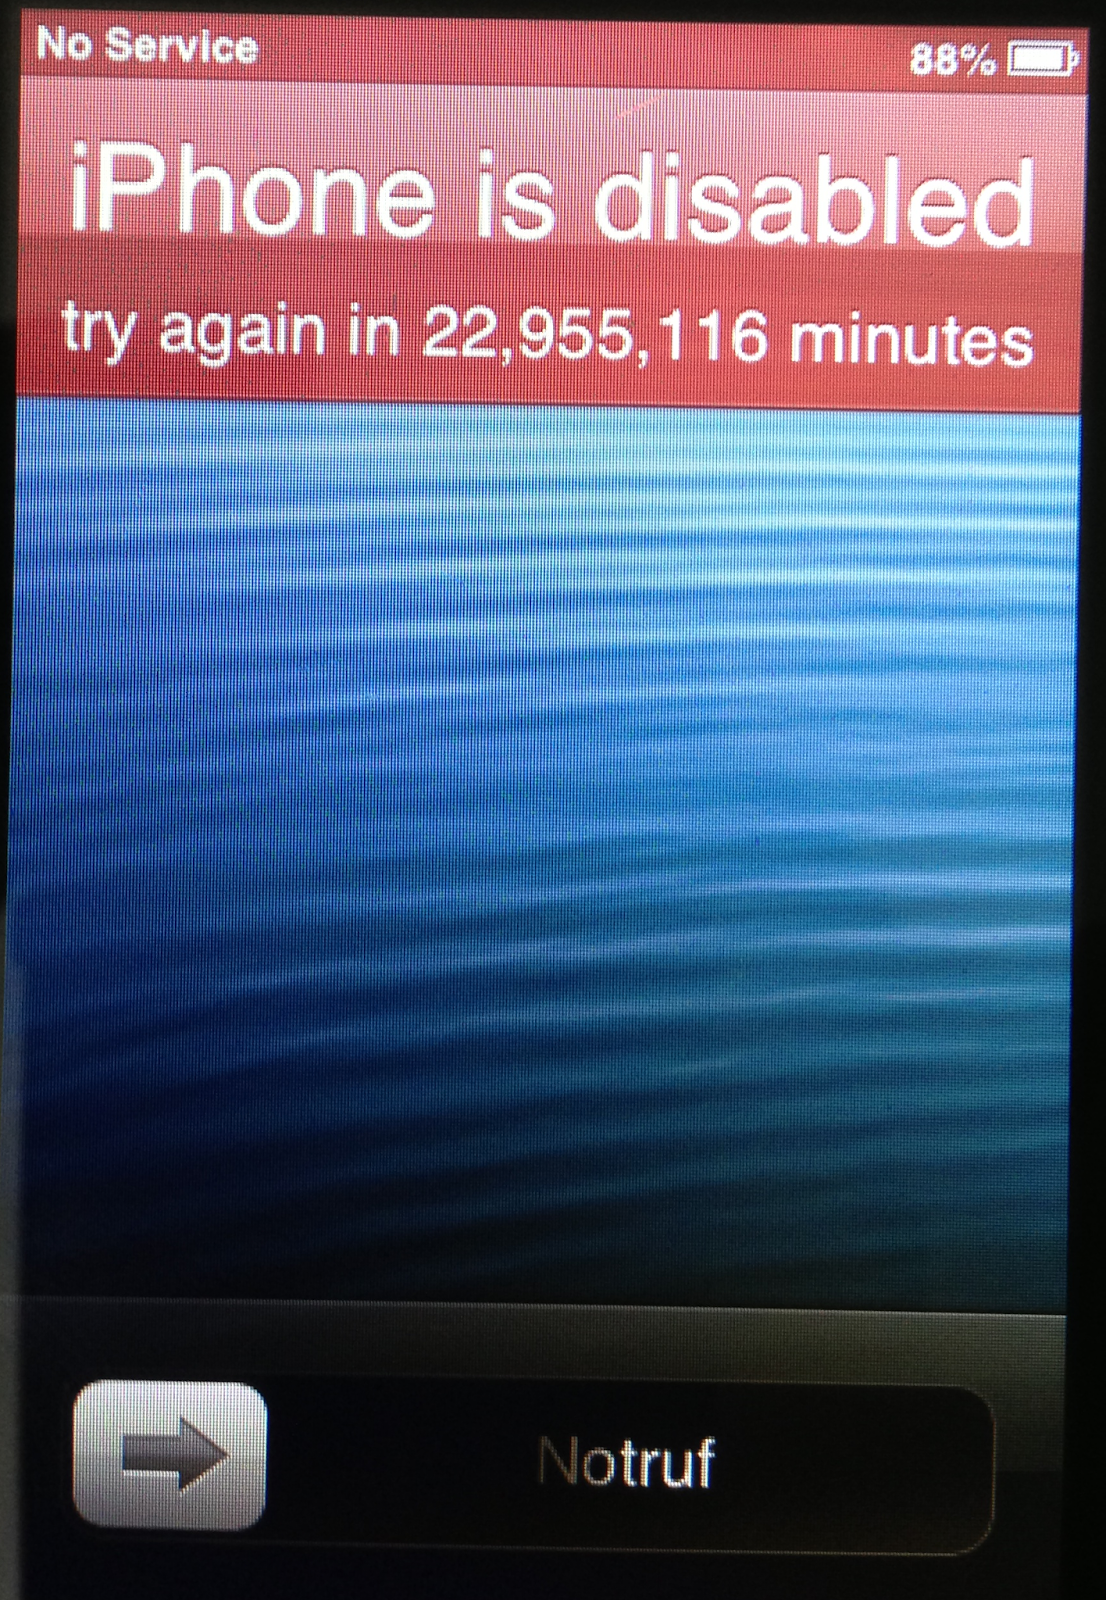 iPhone is disabled try again in 22,955,128 minutes!